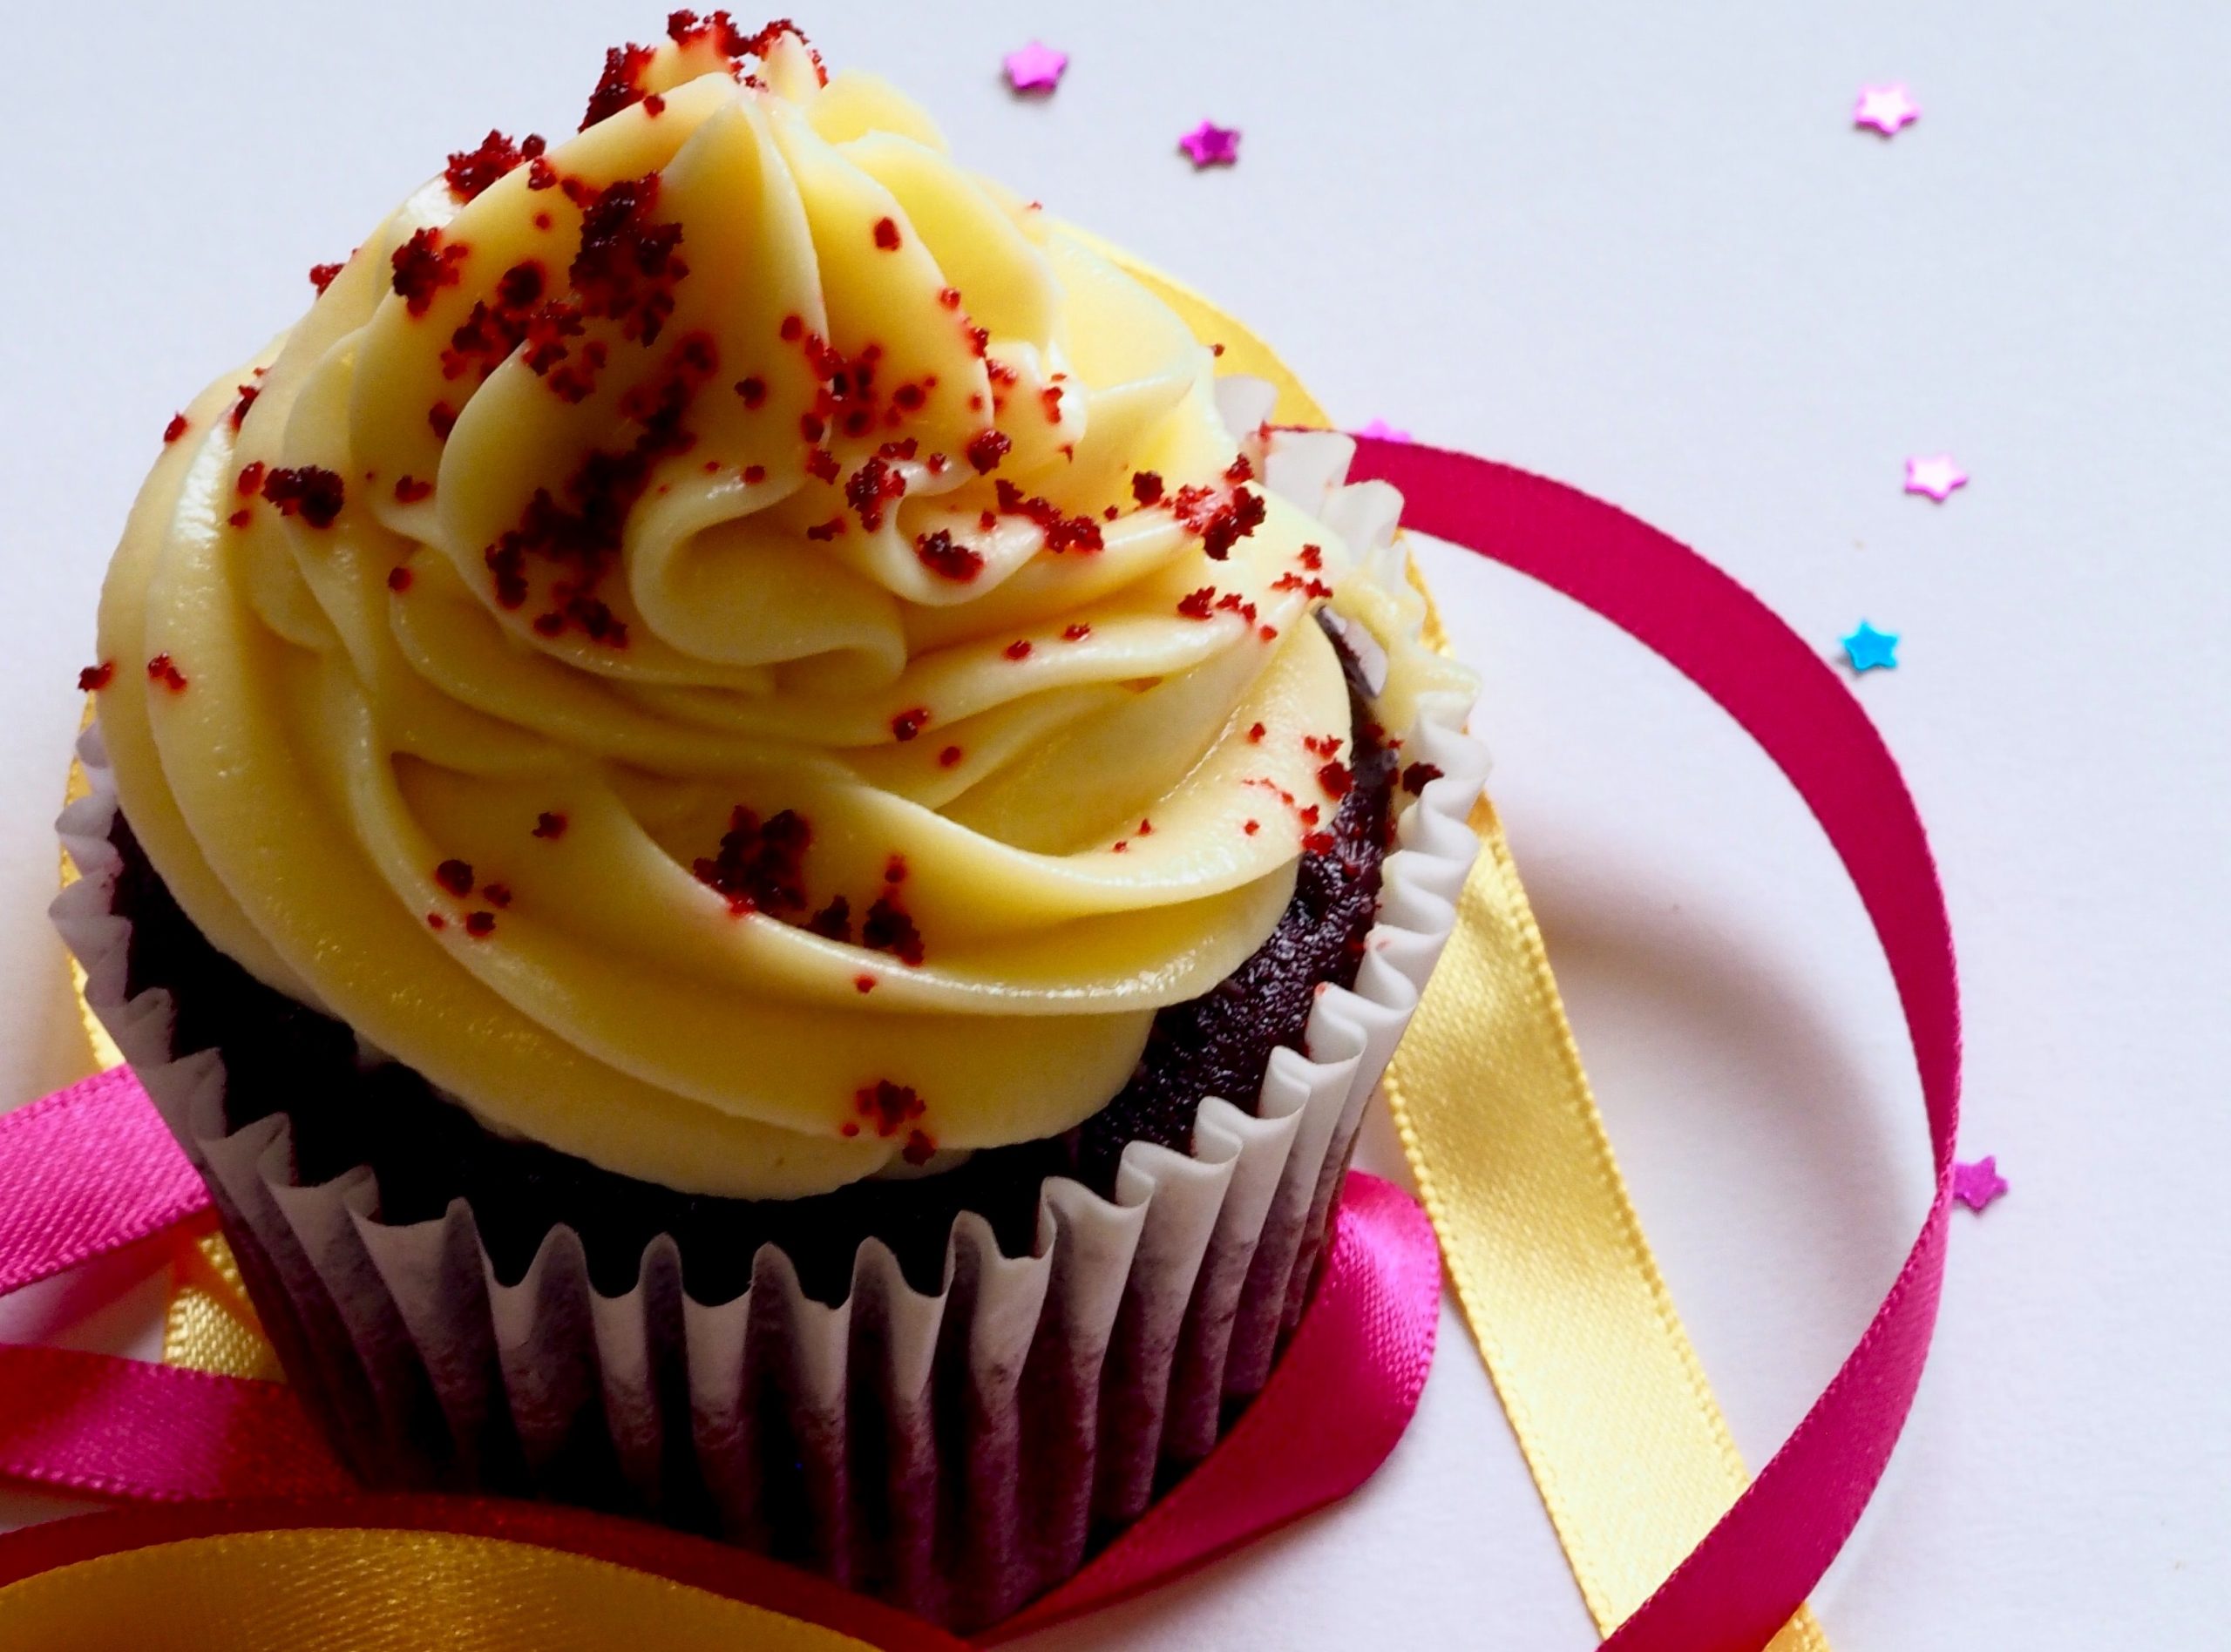 chocolate-cupcake-with-white-and-red-toppings-913136